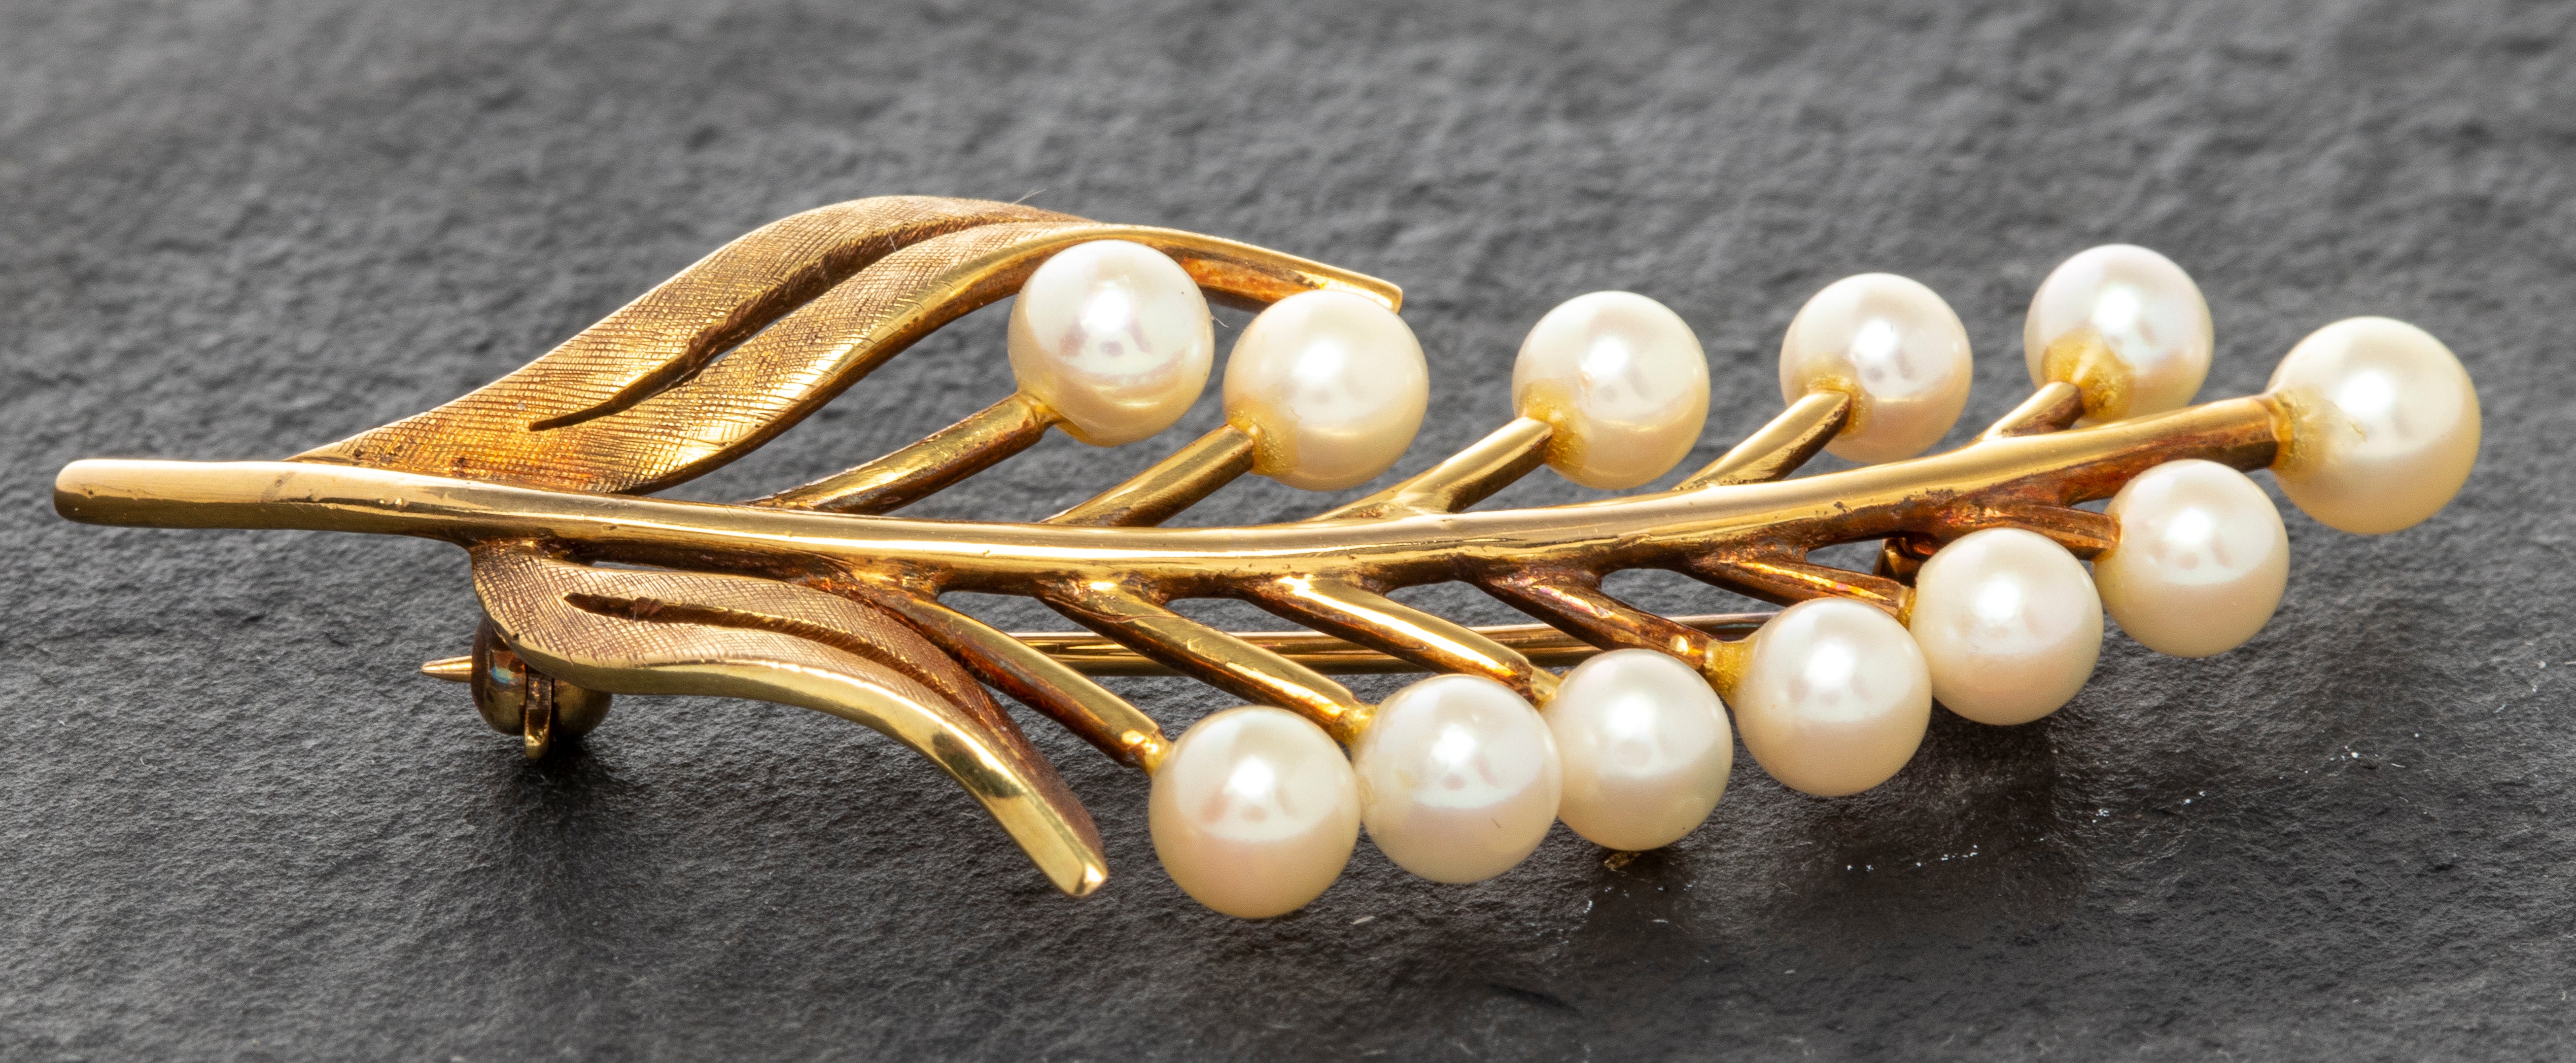 Vintage Pearl Grape Bunch Brooch Pin 14K Yellow Gold